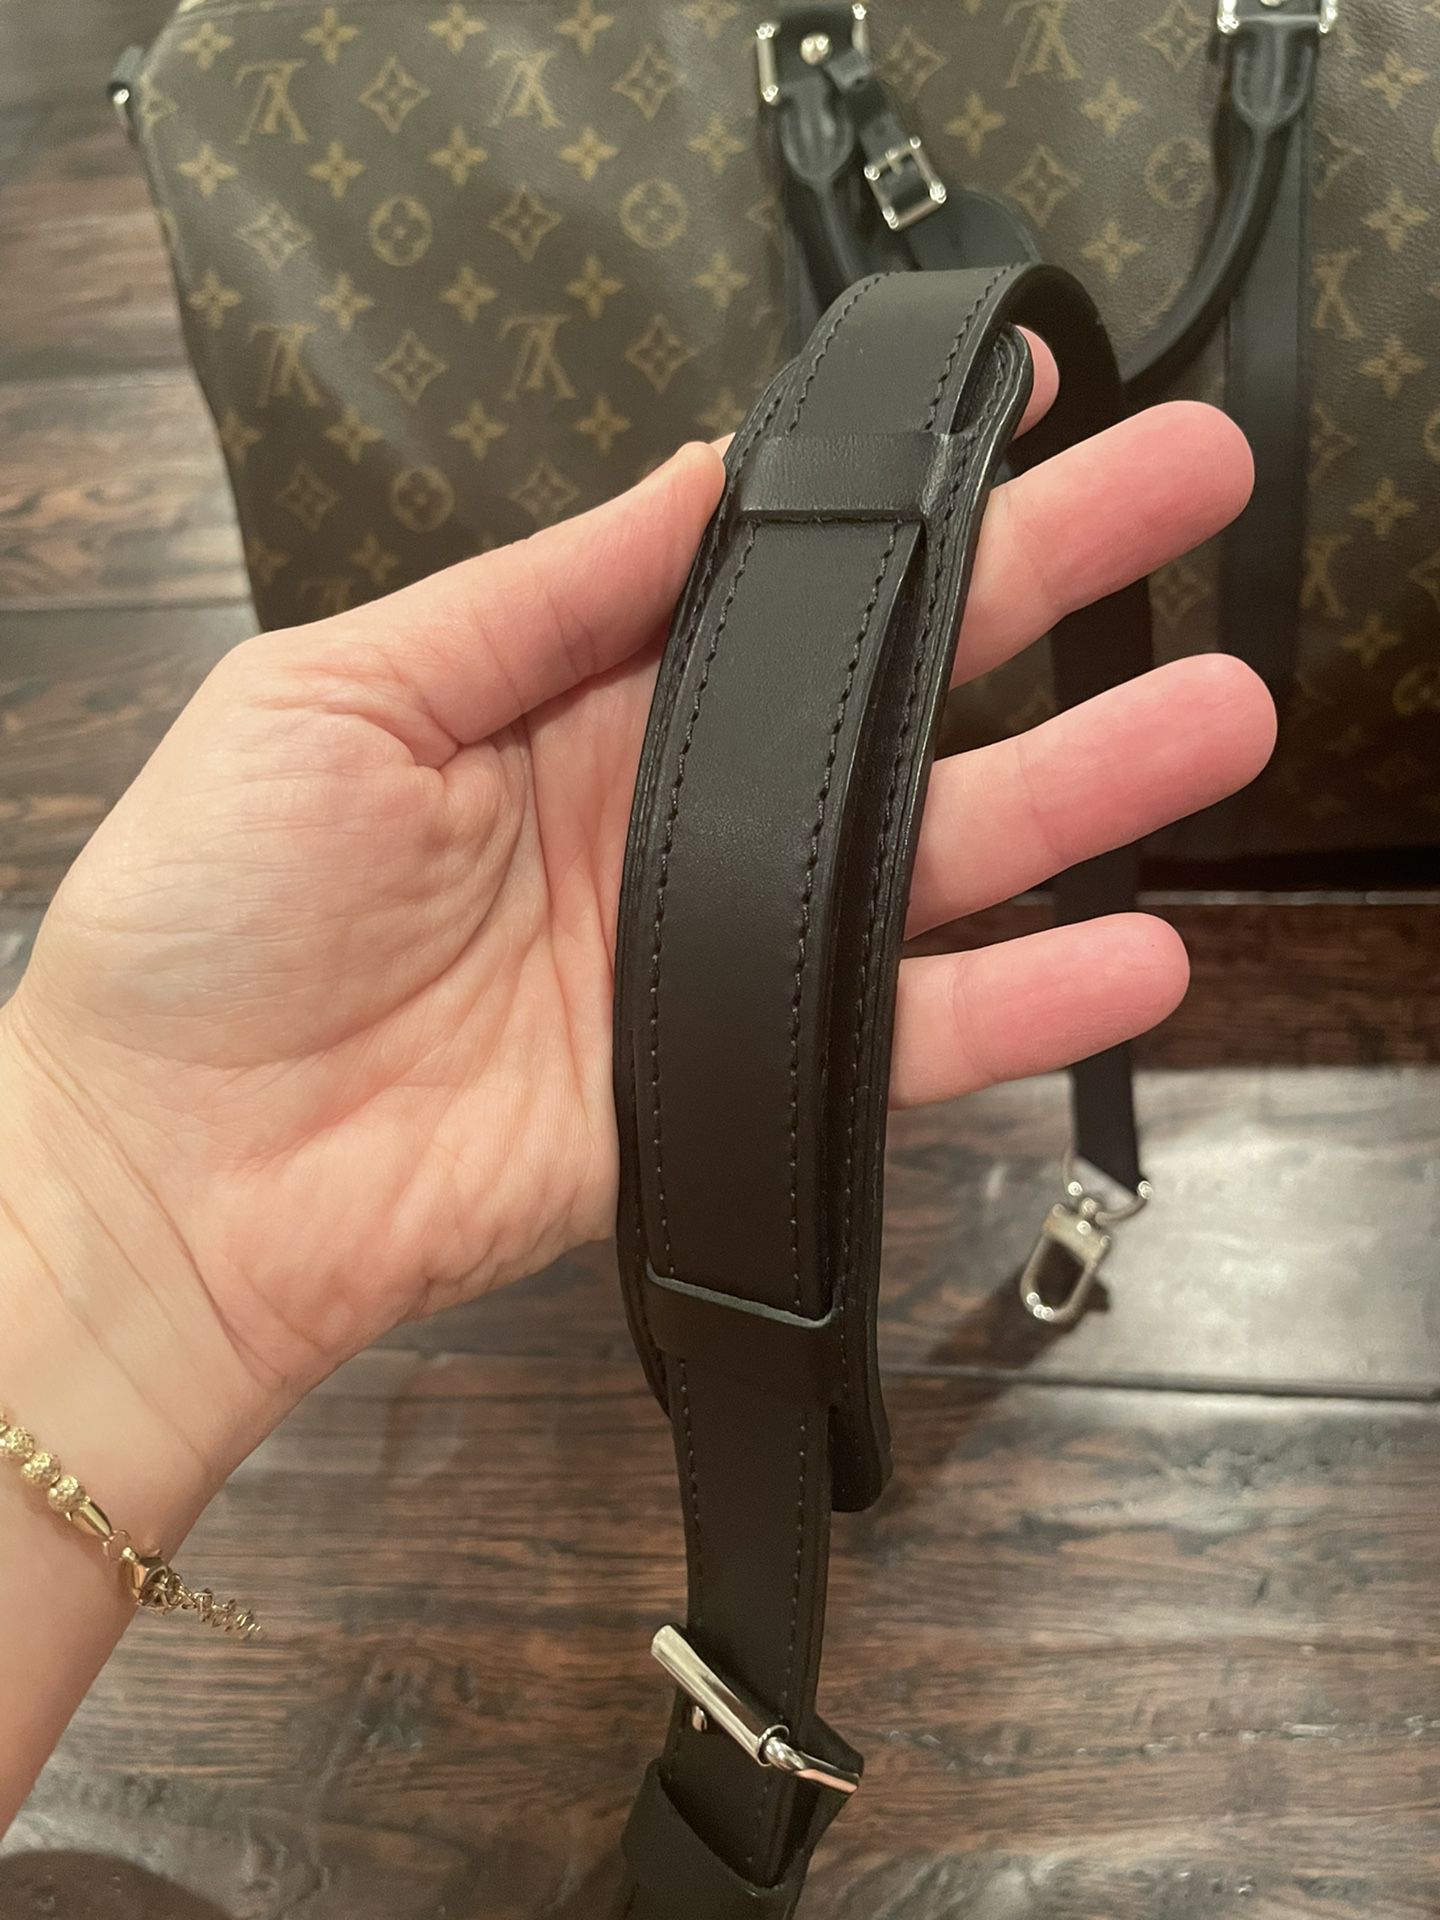 Louis Vuitton Keepall Prism Bag for Sale in Newport News, VA - OfferUp